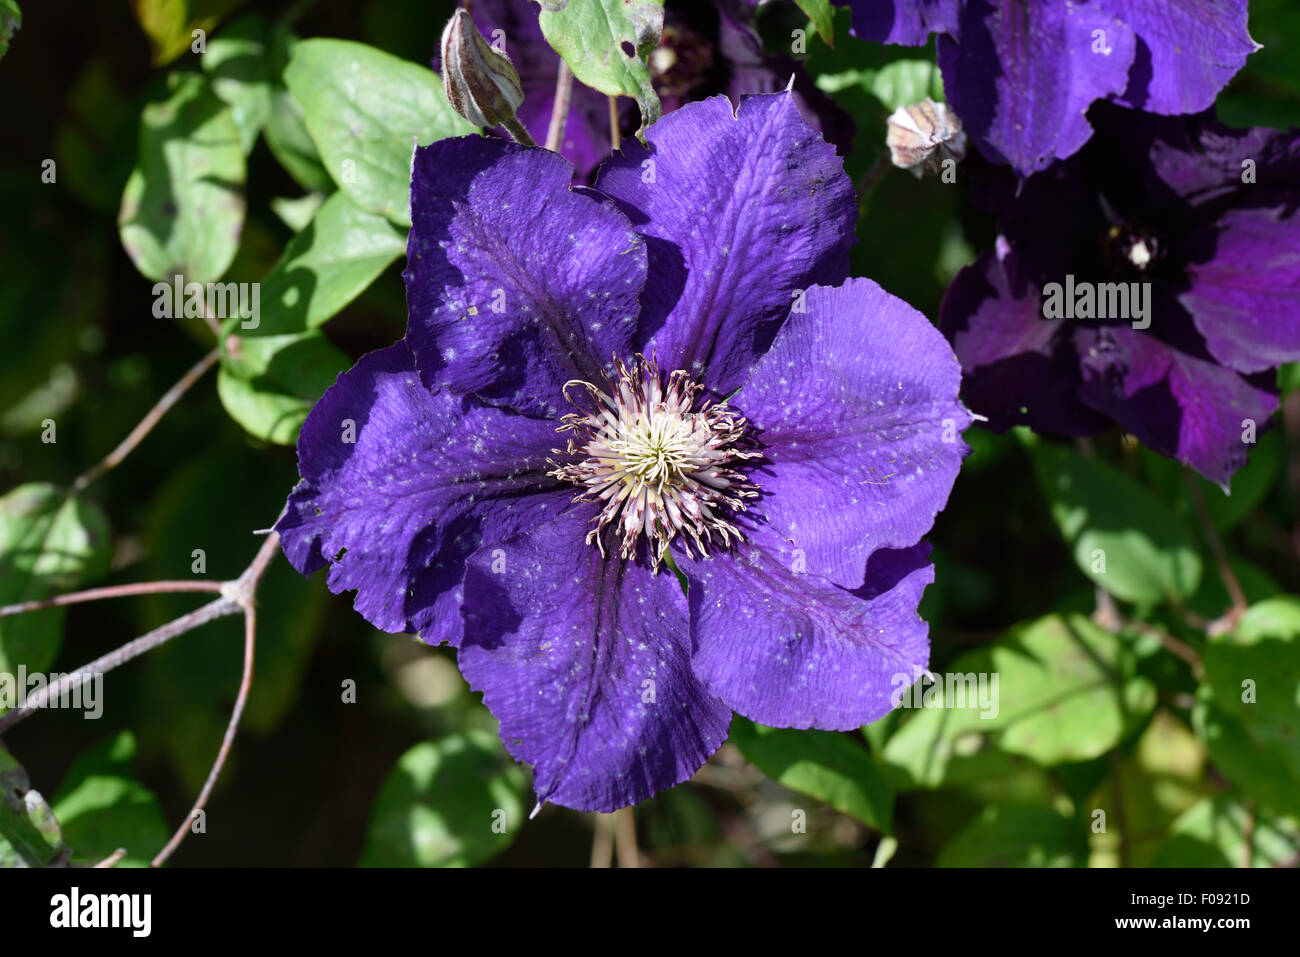 Early development of powedery mildew on the flower of a purple flowering clematis in summer, Berkshire, August Stock Photo